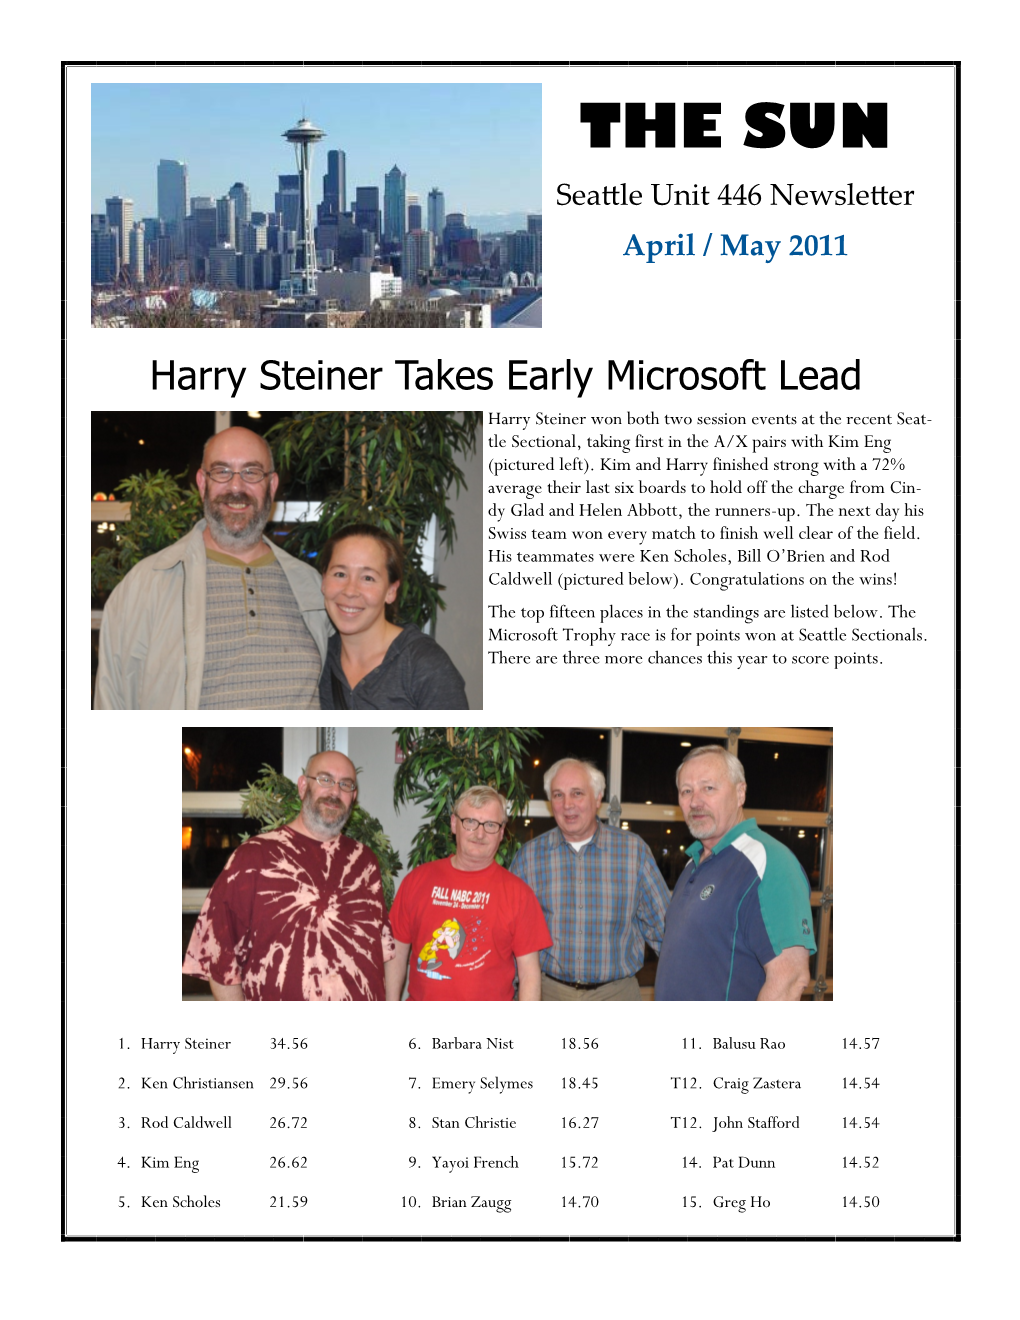 THE SUN Seattle Unit 446 Newsletter April / May 2011